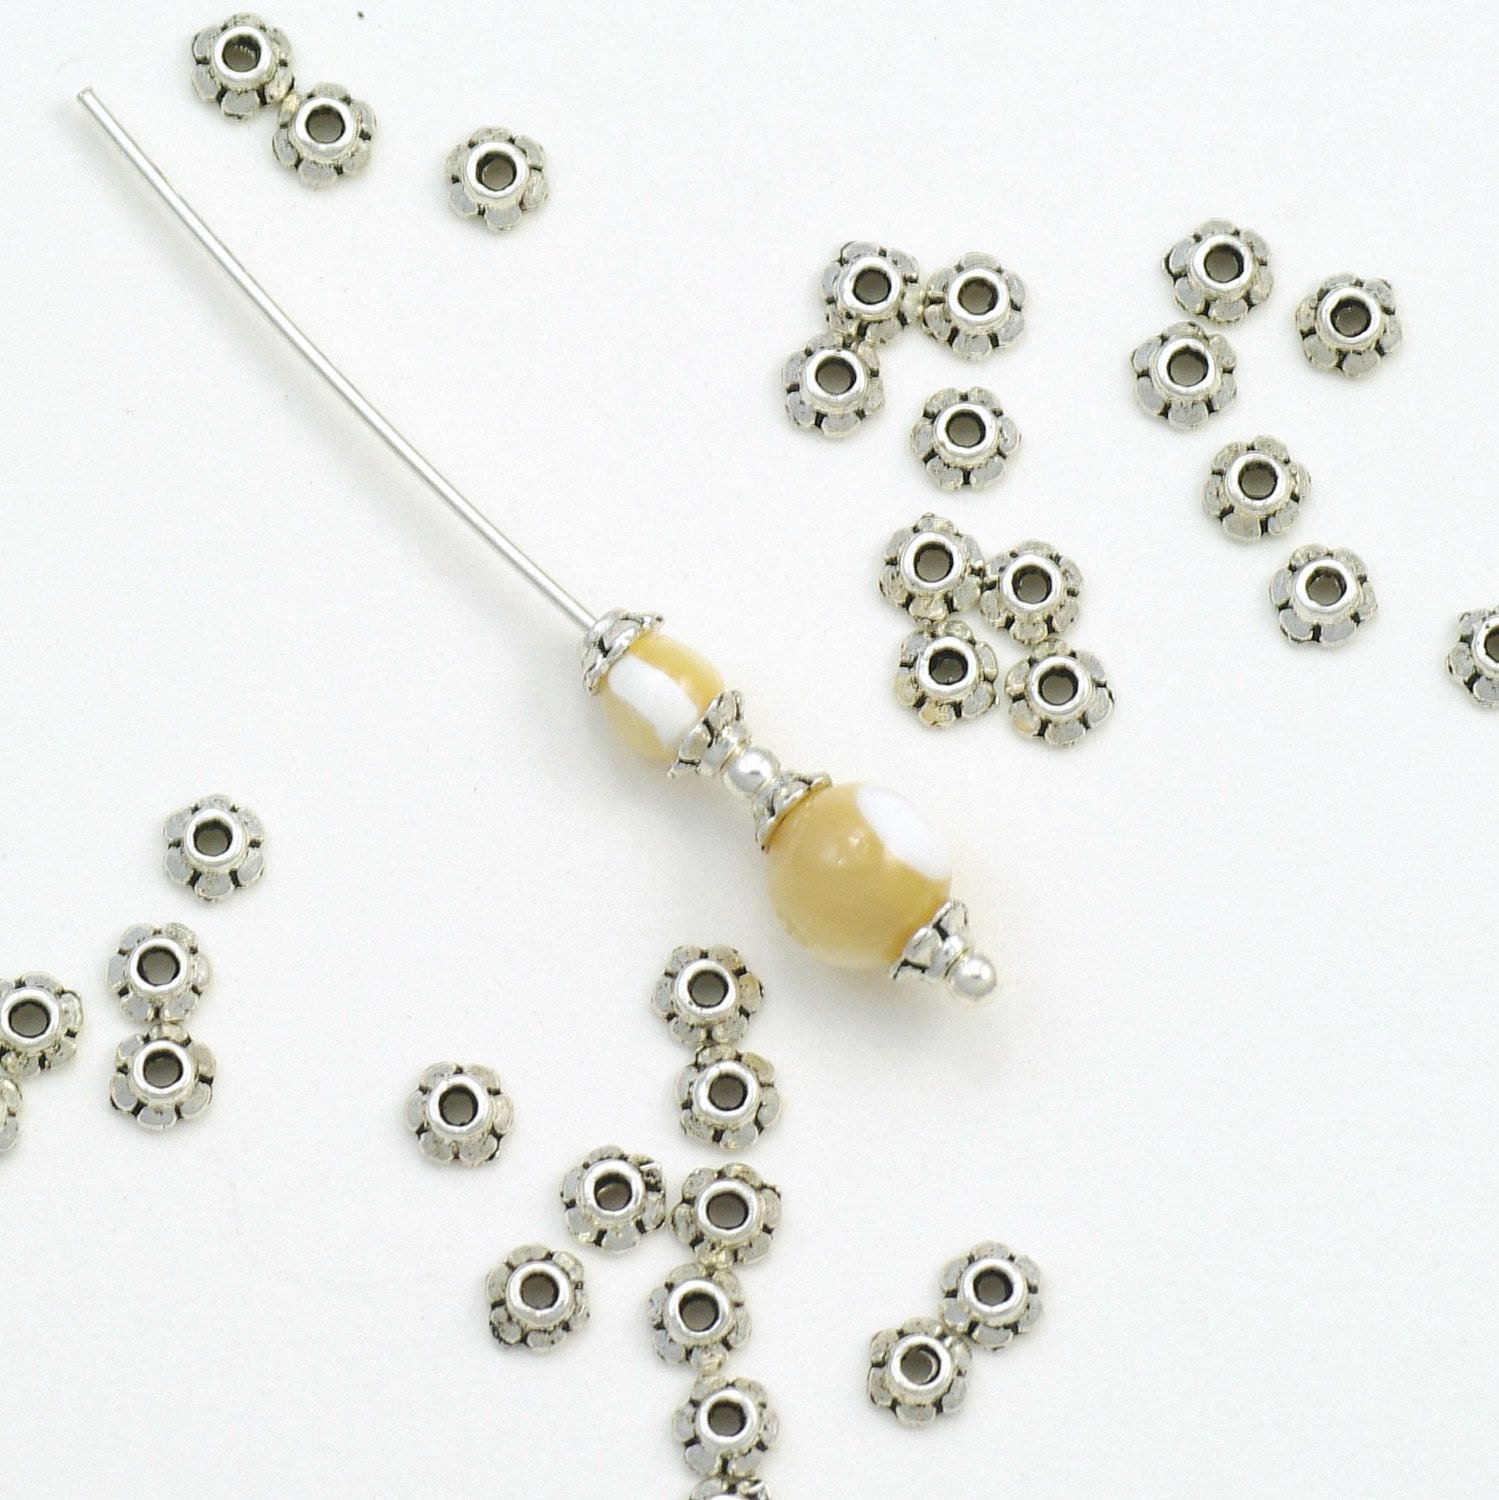 50pcs Flower Bead Capsgold Plated Small Flower Bead Caps Supplies for  Jewelry Making Gold Beads Capfindings Beads 4mm 